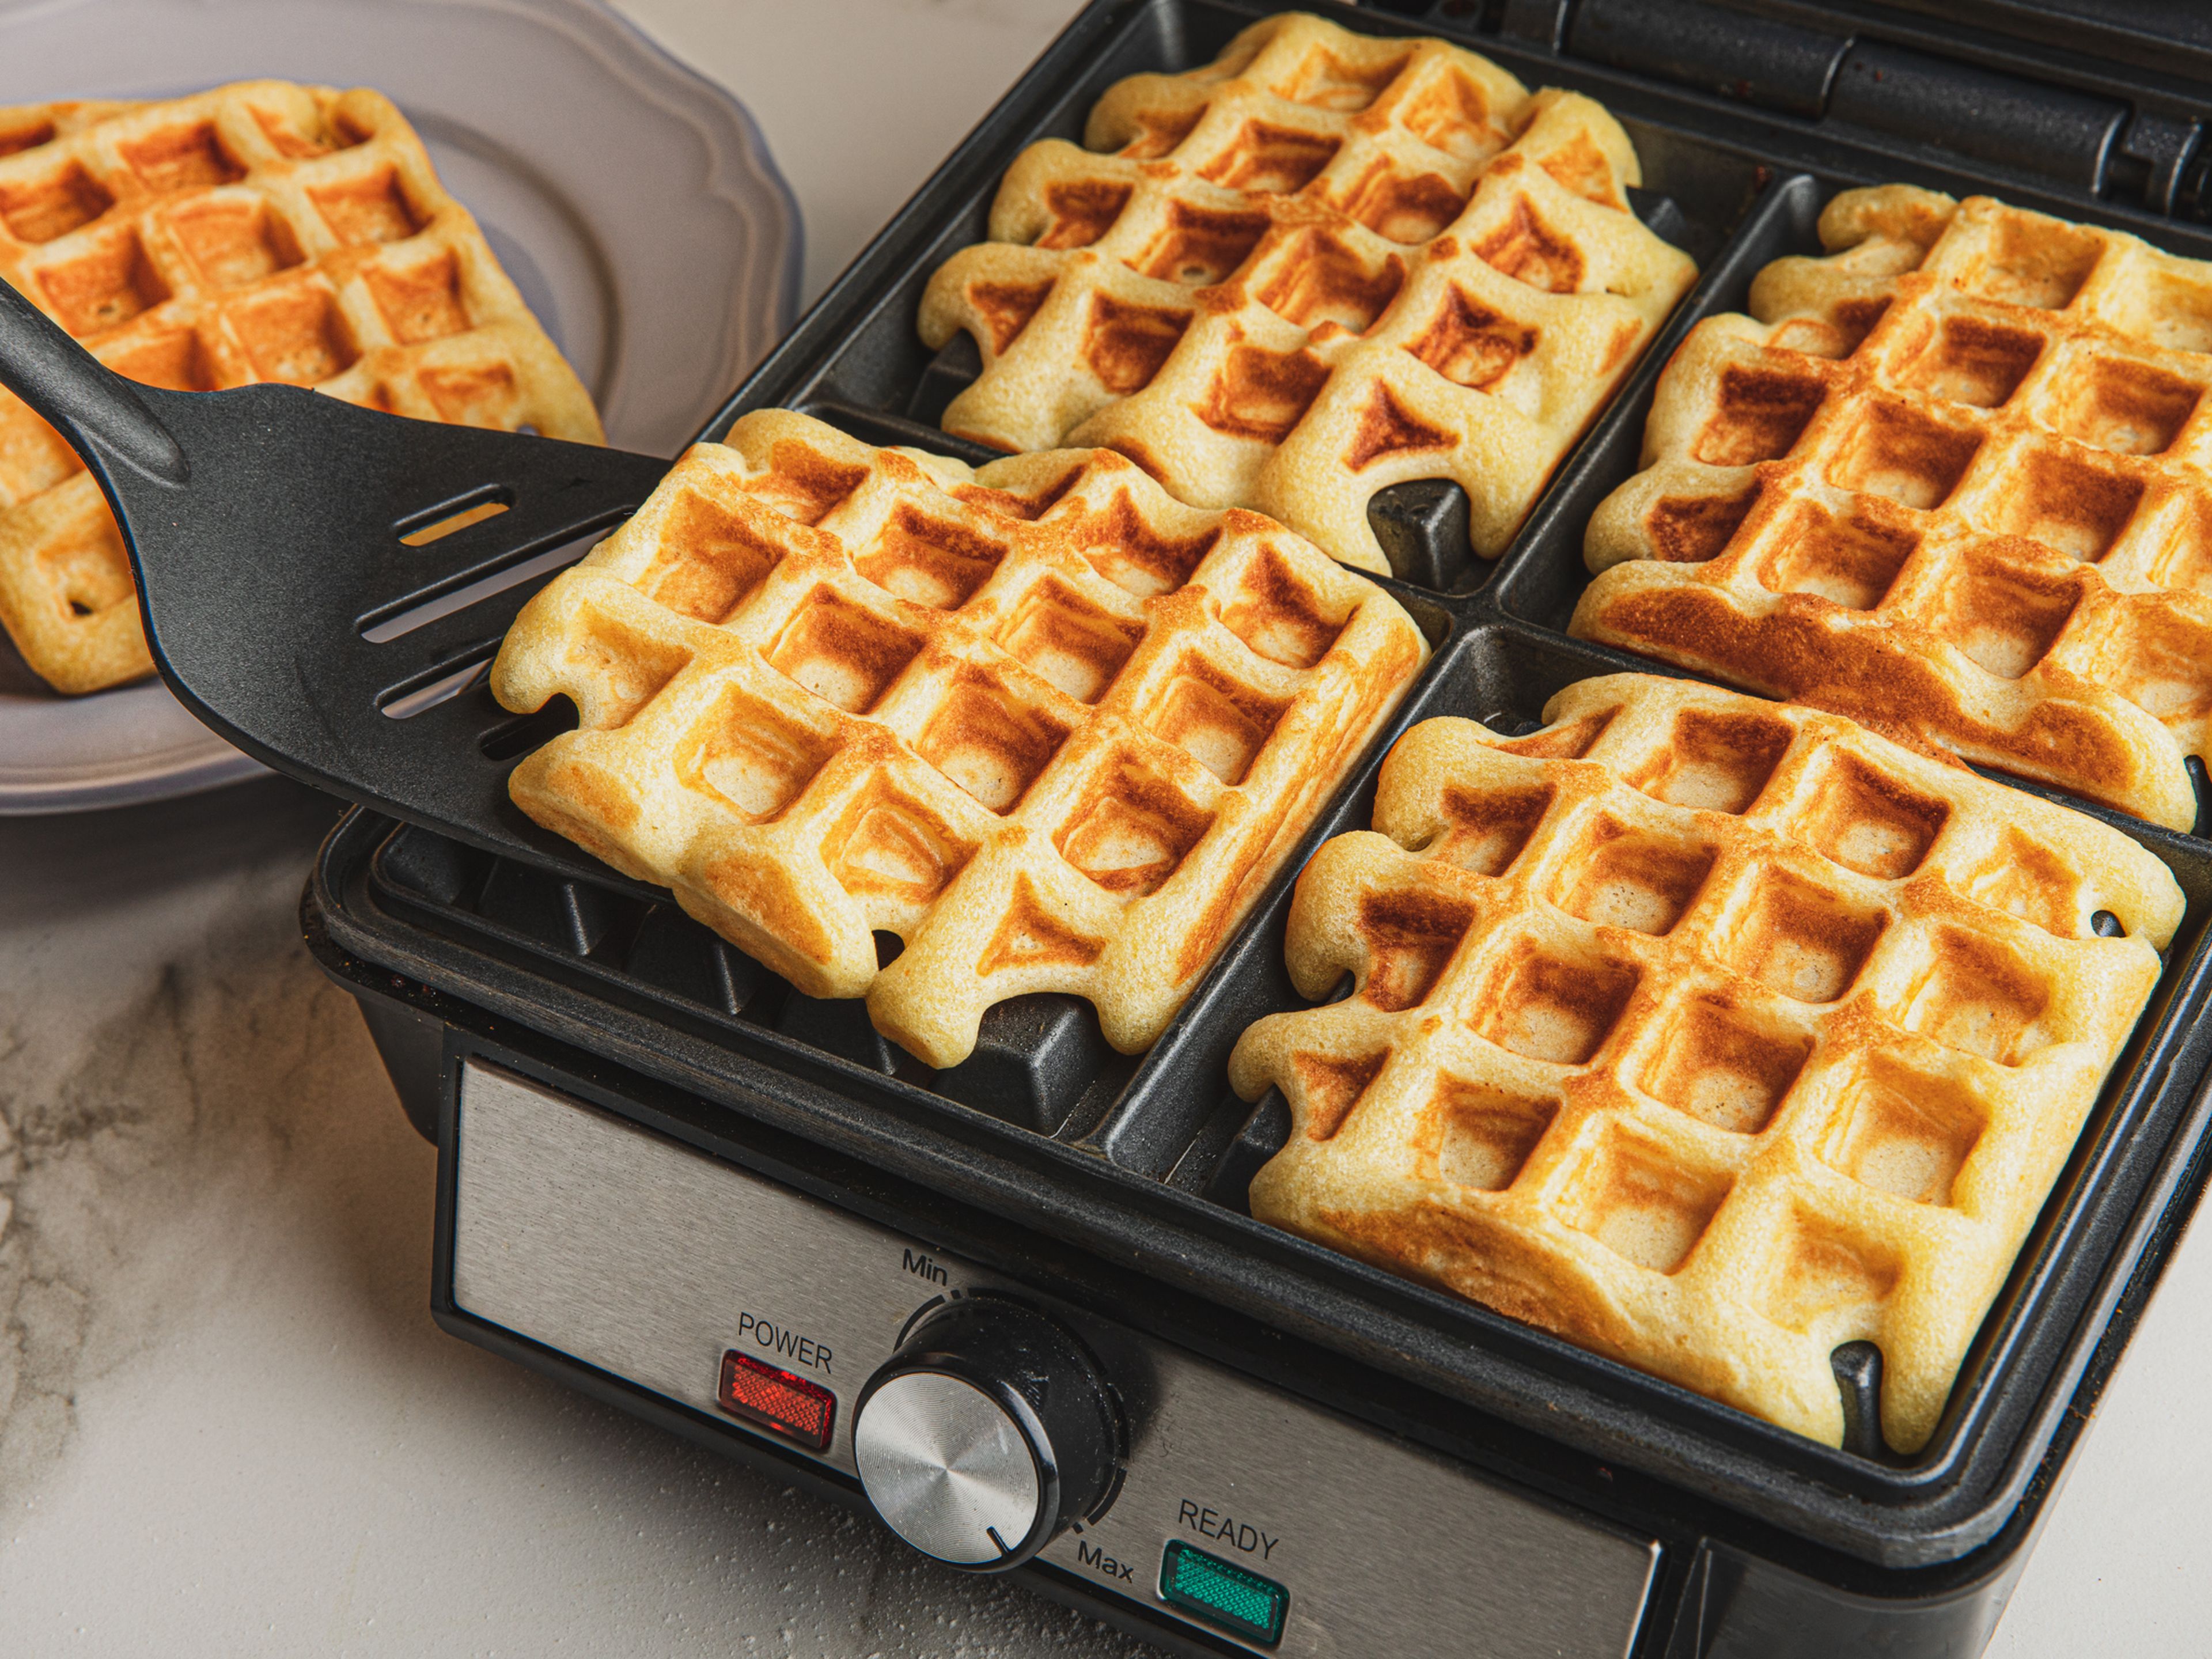 Grease the waffle iron with some vegetable oil. Then, add a spoonful of waffle batter, close the lid, and bake until crispy. Continue until the batter is used up. Enjoy waffles with jam, cream, butter and/or syrup!